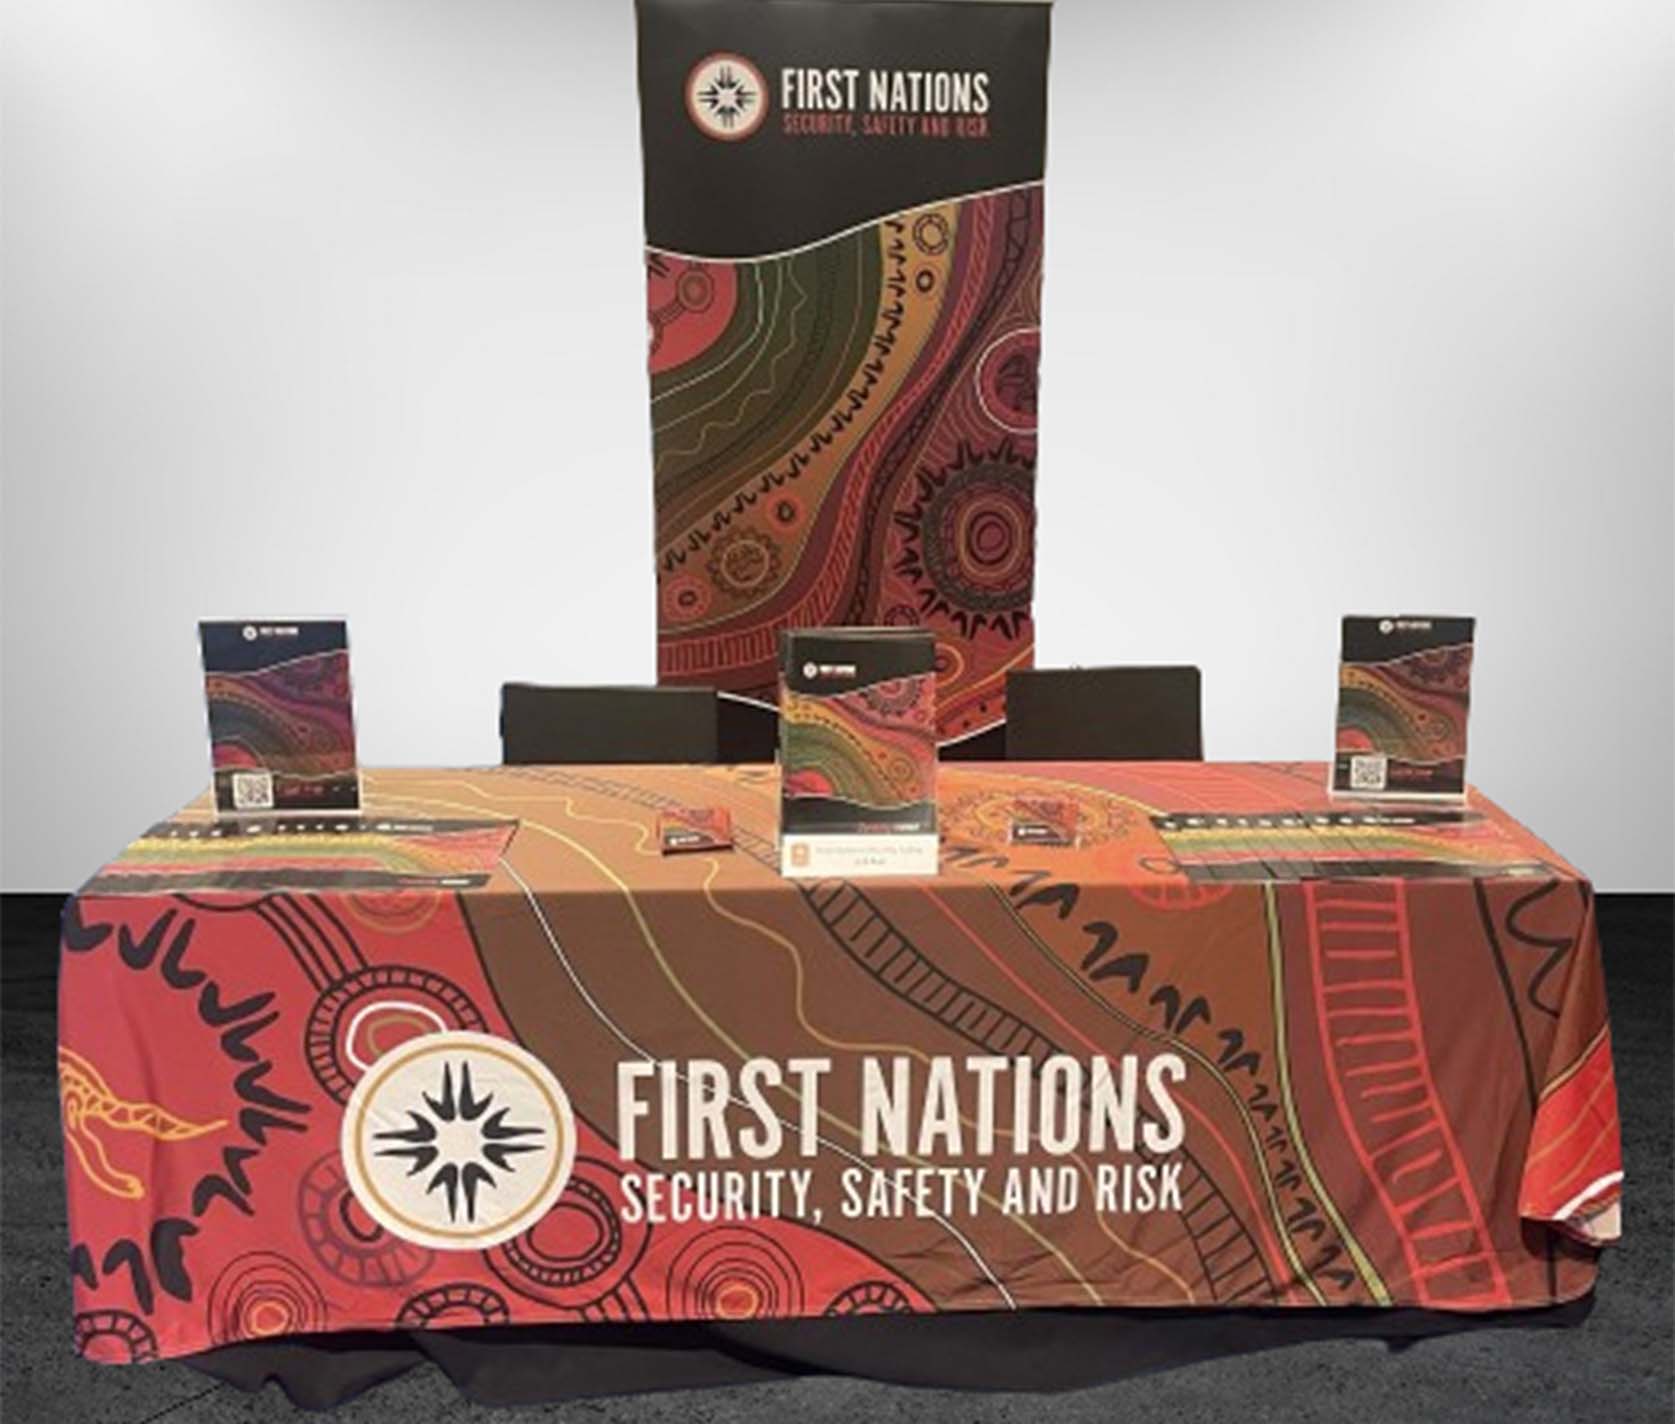 fist nations banner